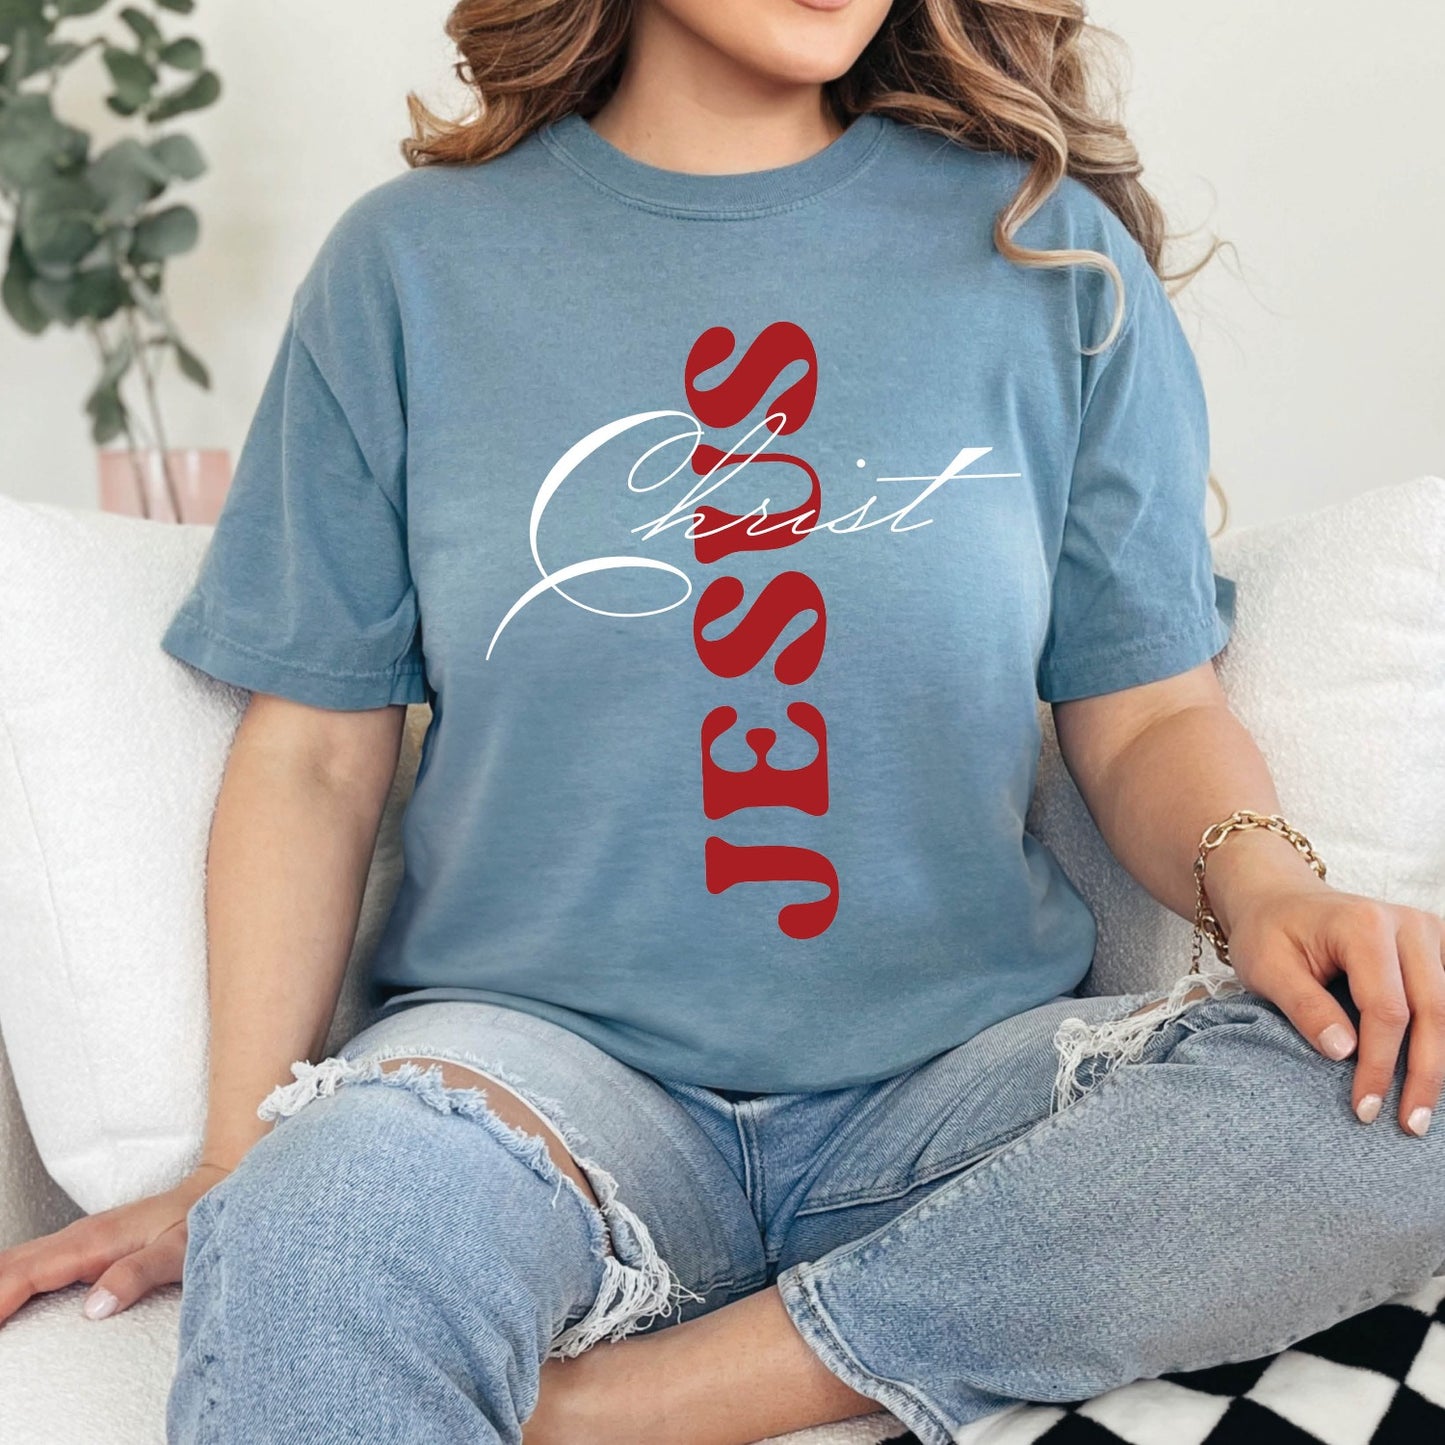 Young woman wearing a dusty ice blue color Christian Comfort Colors 1717 heavyweight unisex t-shirt with faith-based bible typography that says, "Jesus Christ" and white and red letters in the shape of the cross, created for men and women Kingdom believers